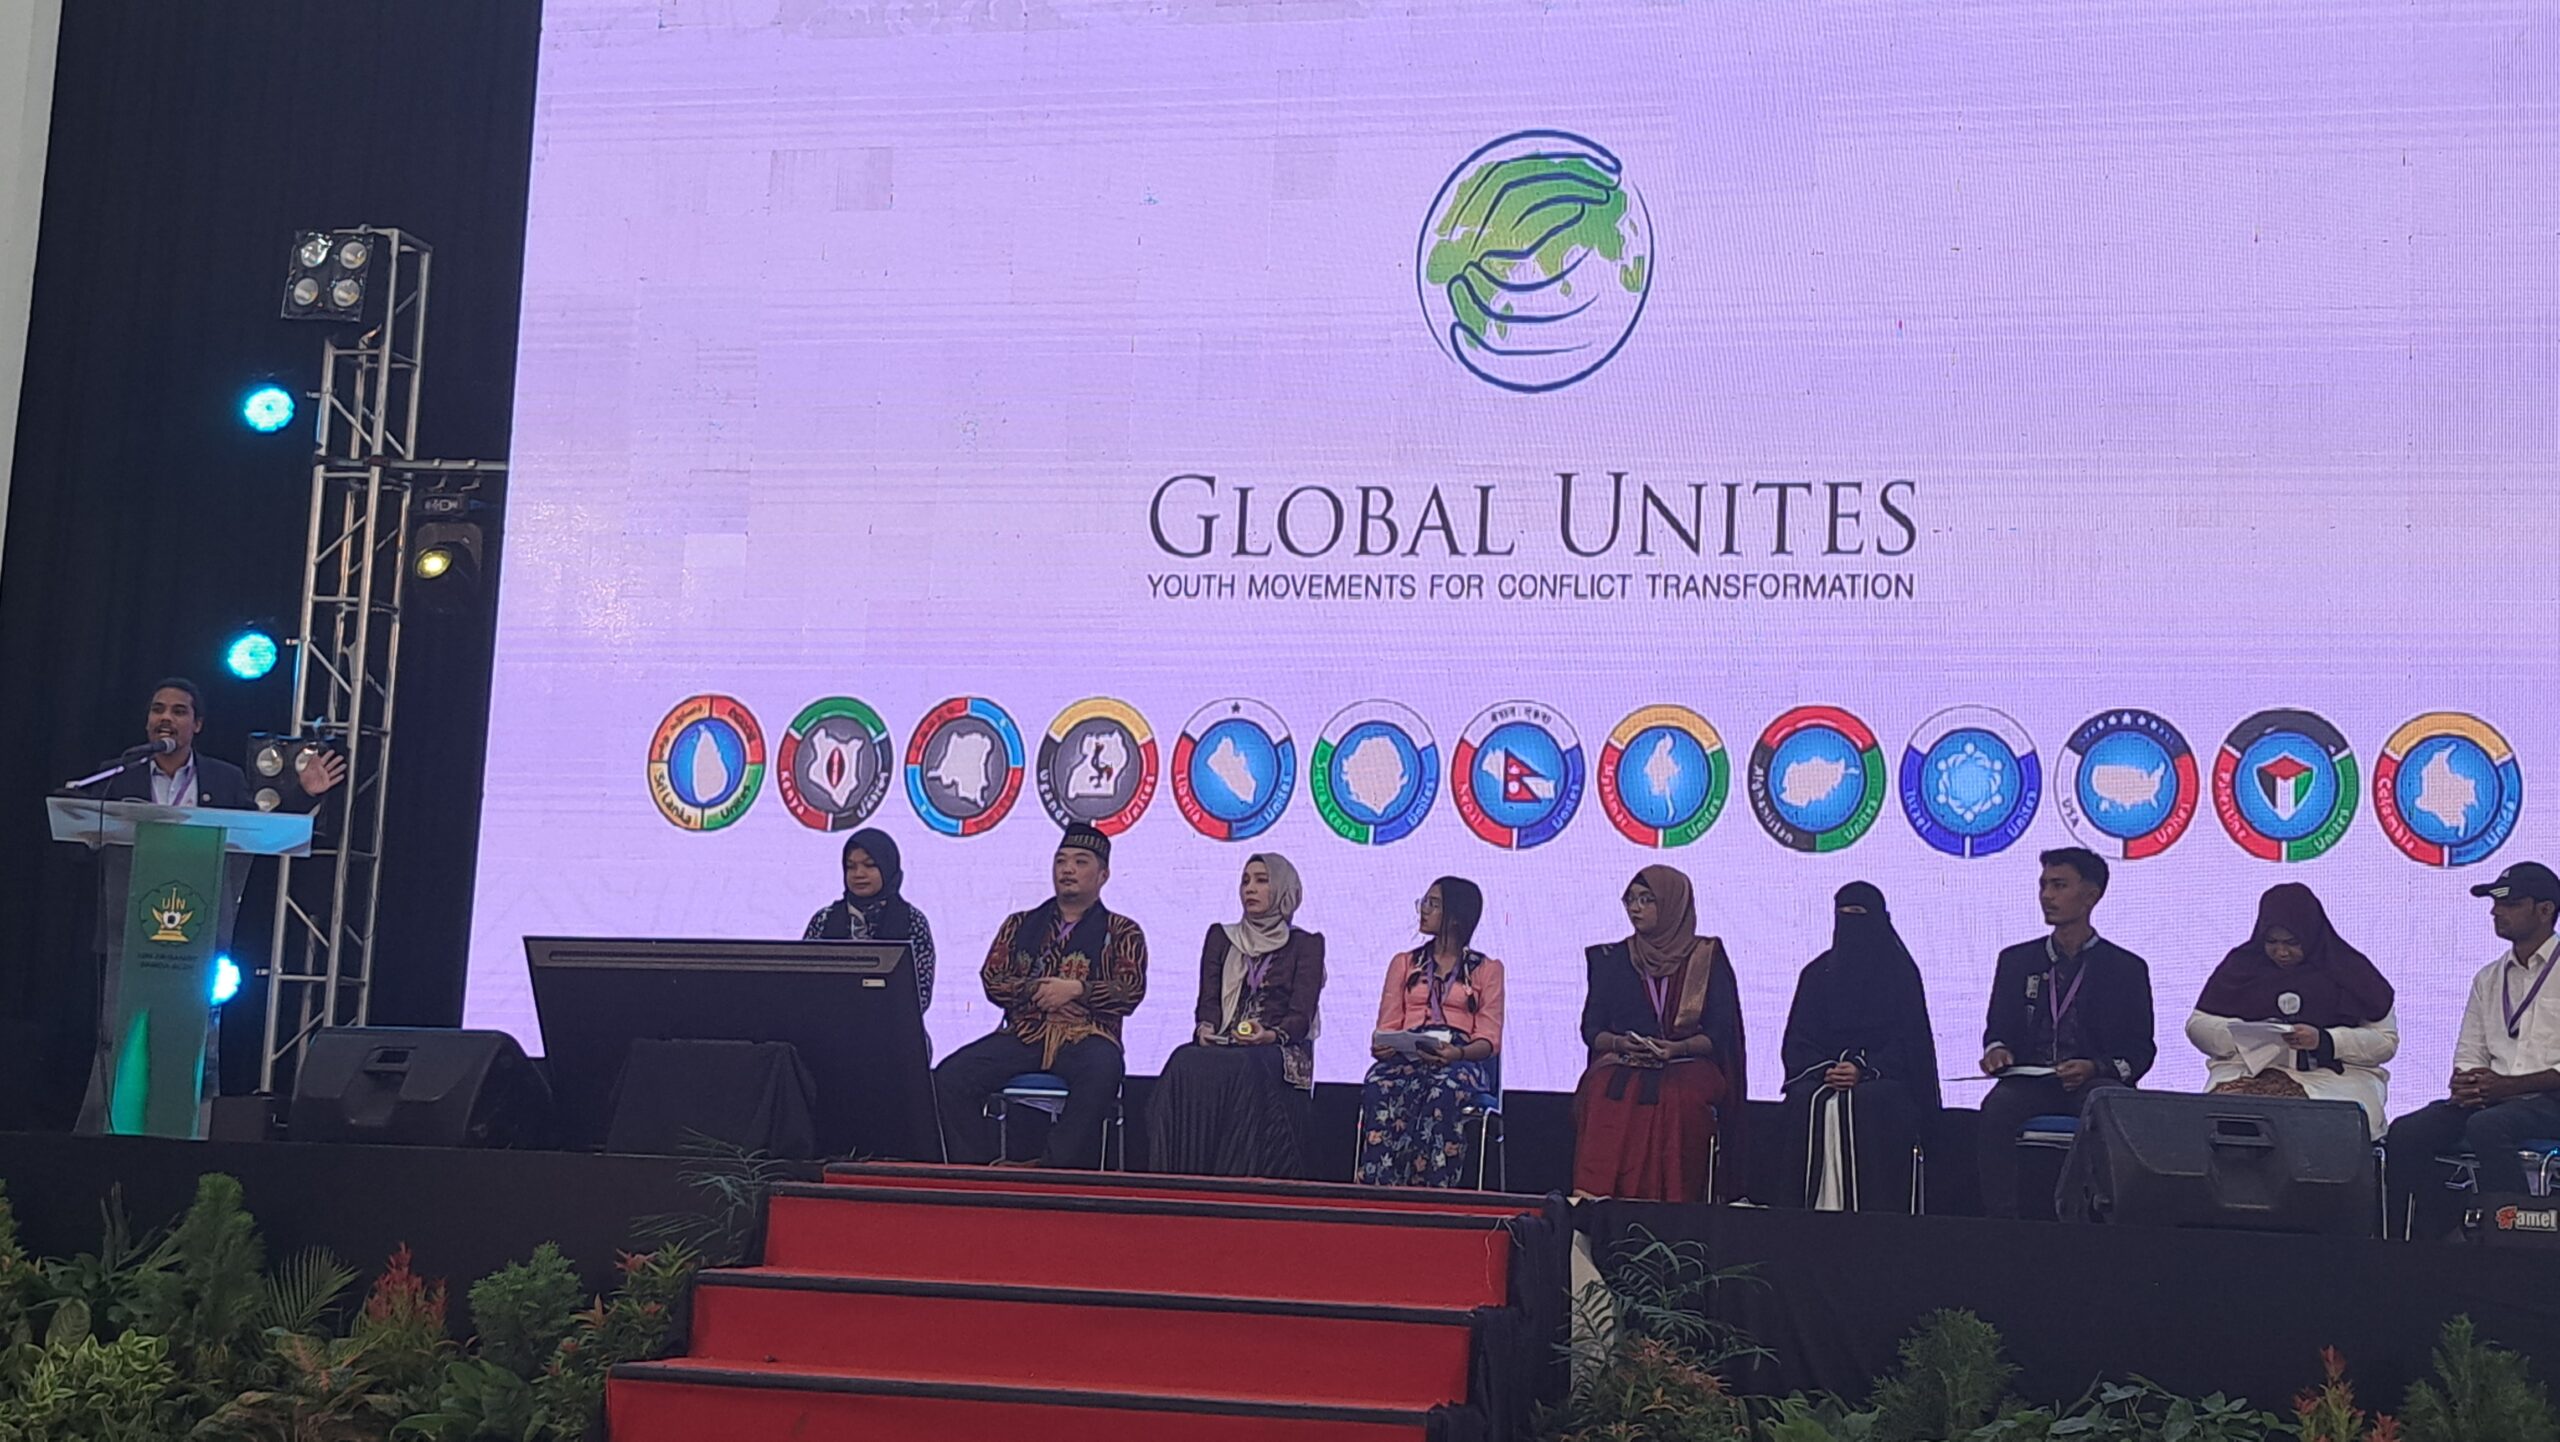 Global Unites as a Youth Peace Movement